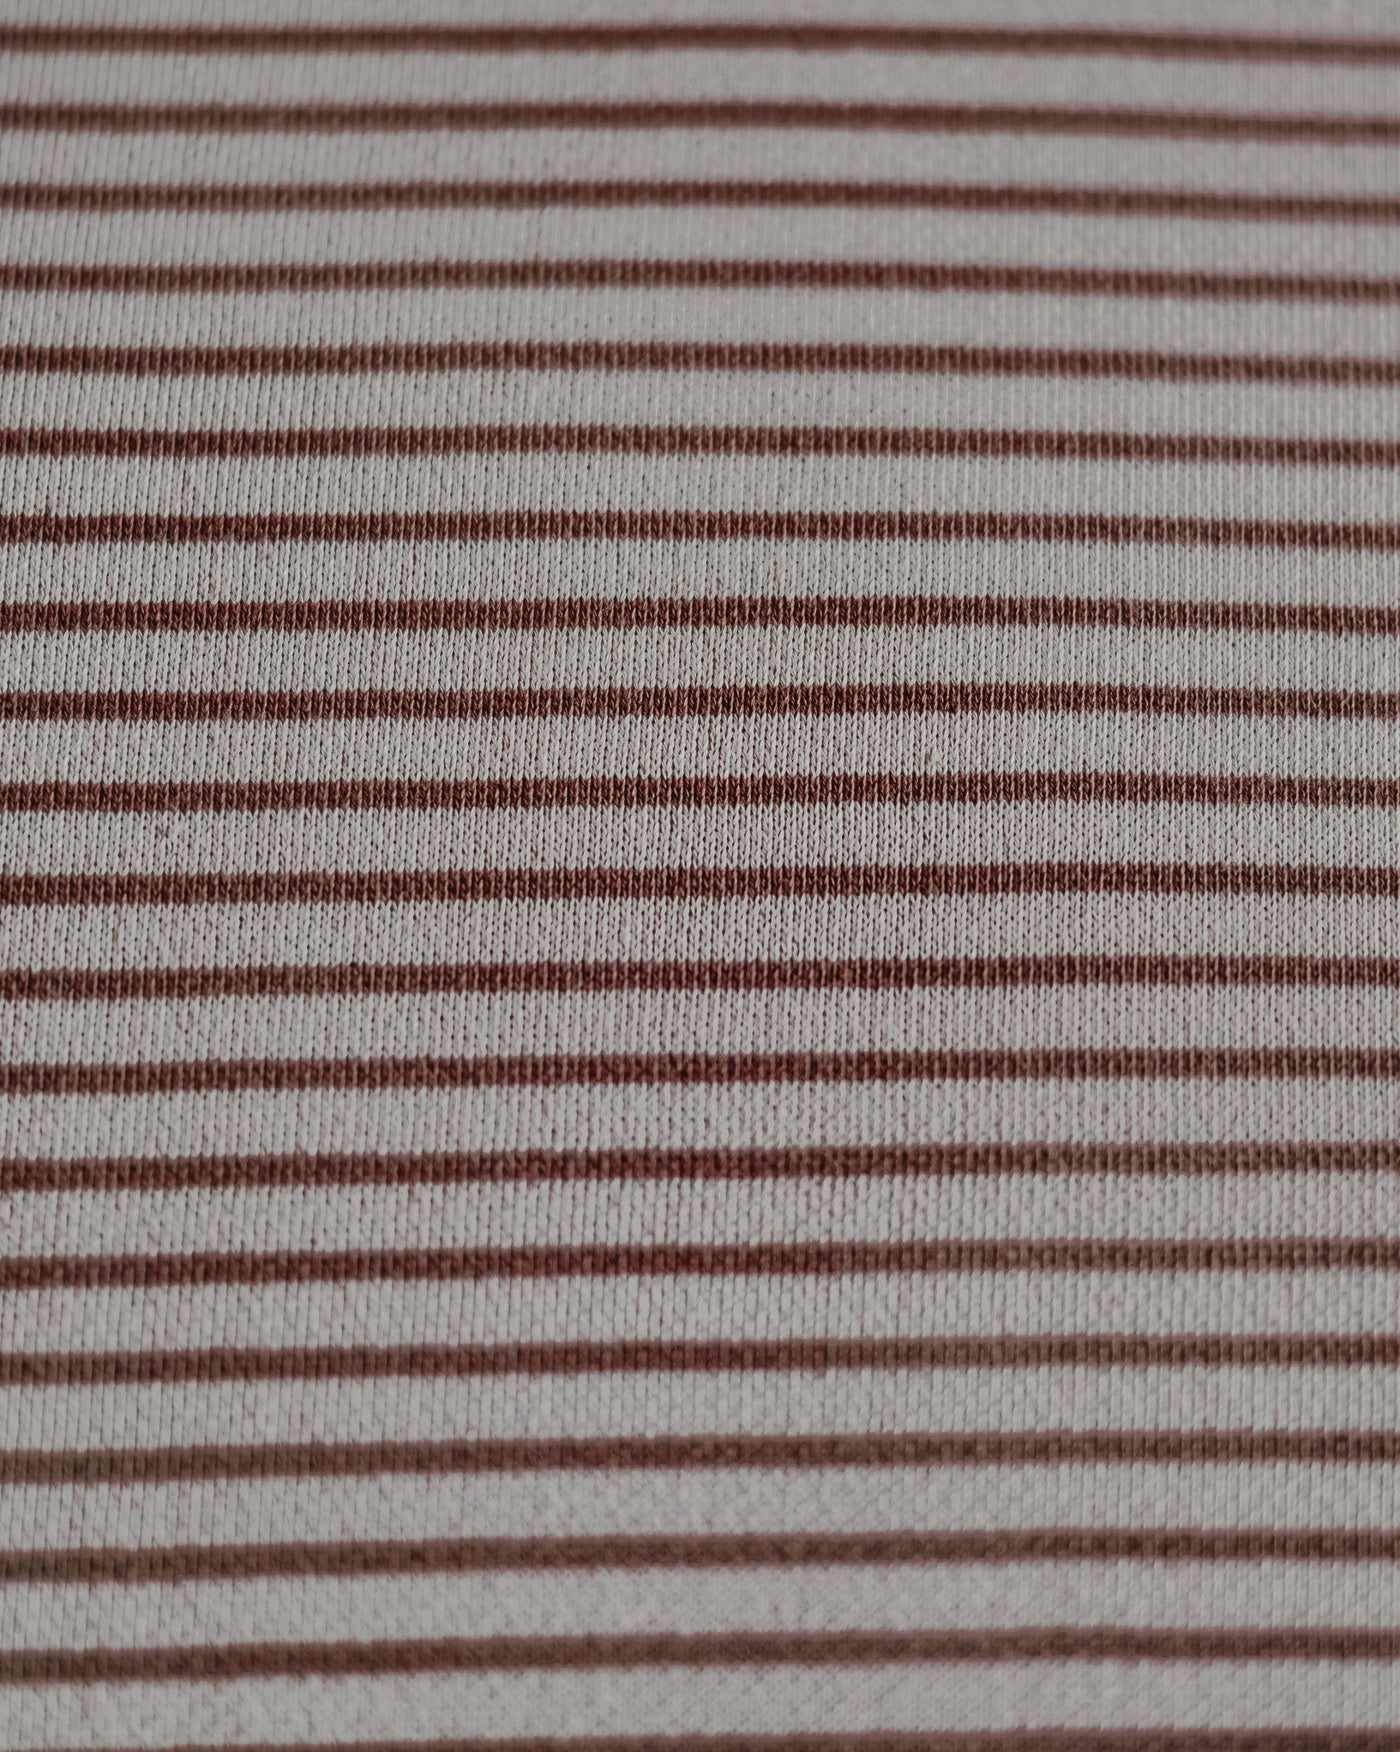 Hello Sailor Dark Rose Striped Bed Product Image Detail